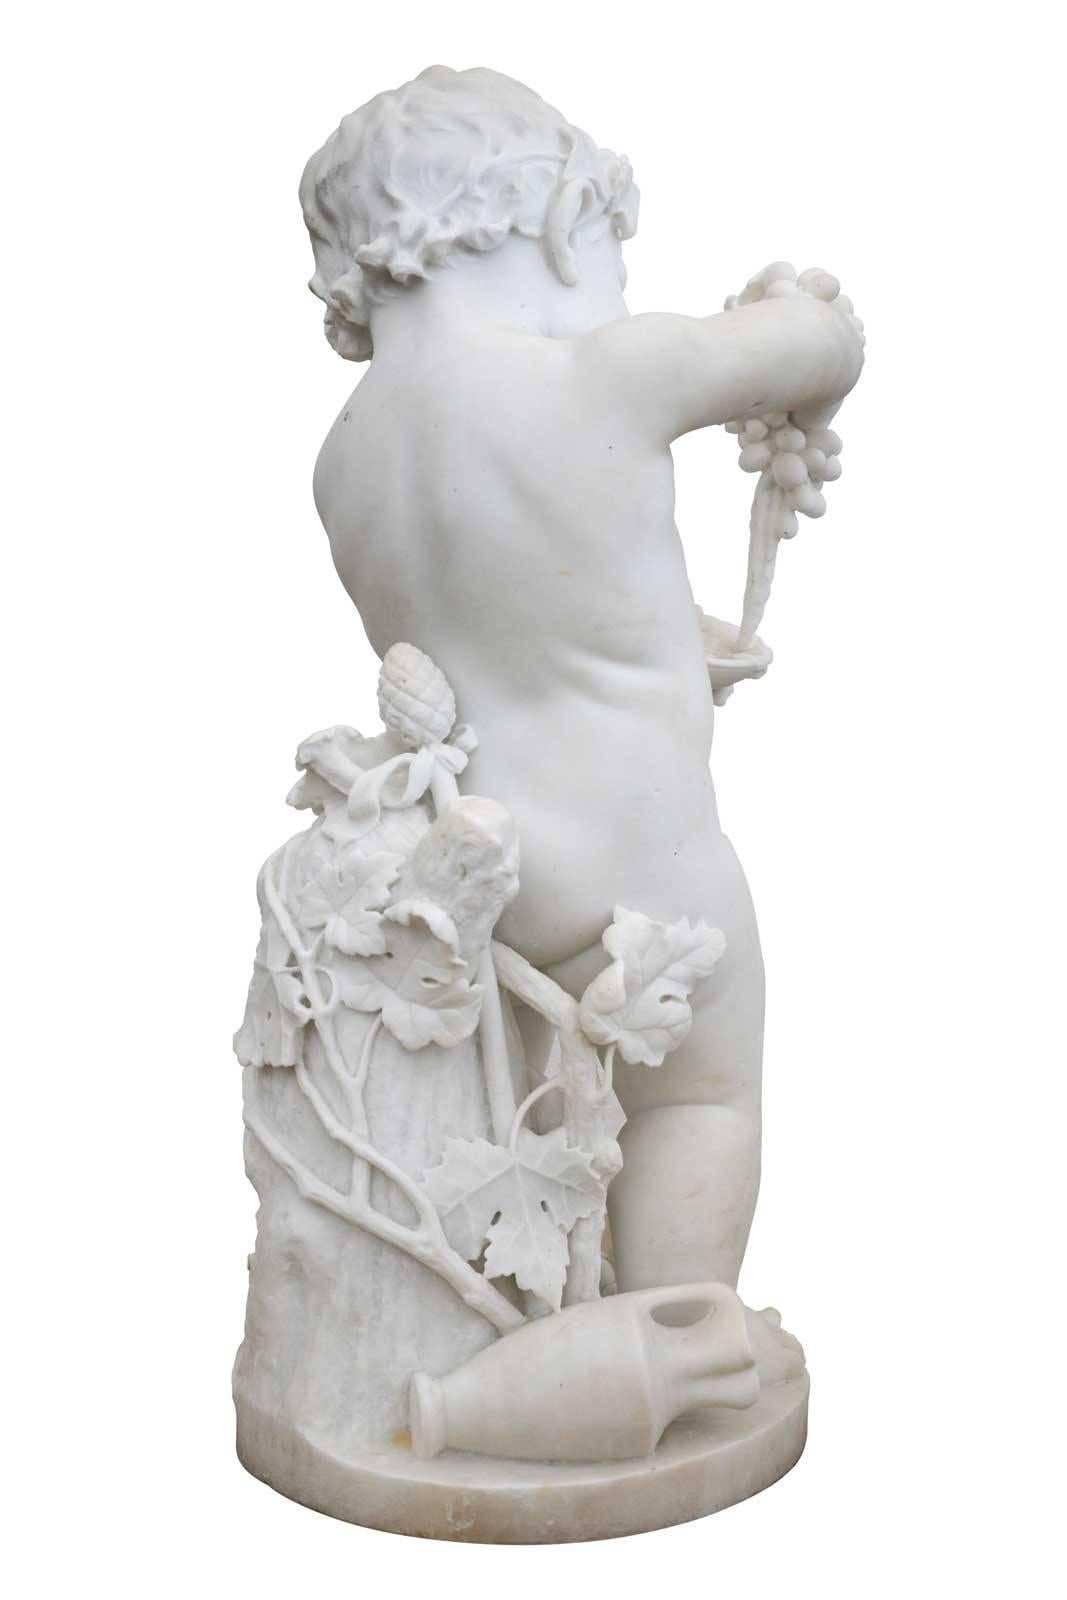 White marble statue of Bacchus or putto, dating from the 19th century. Very finely carved this statue presents a putto crowned with vine leaves, busy pressing grapes in a cup. In Greek mythology, it is common to see represented the god of wine